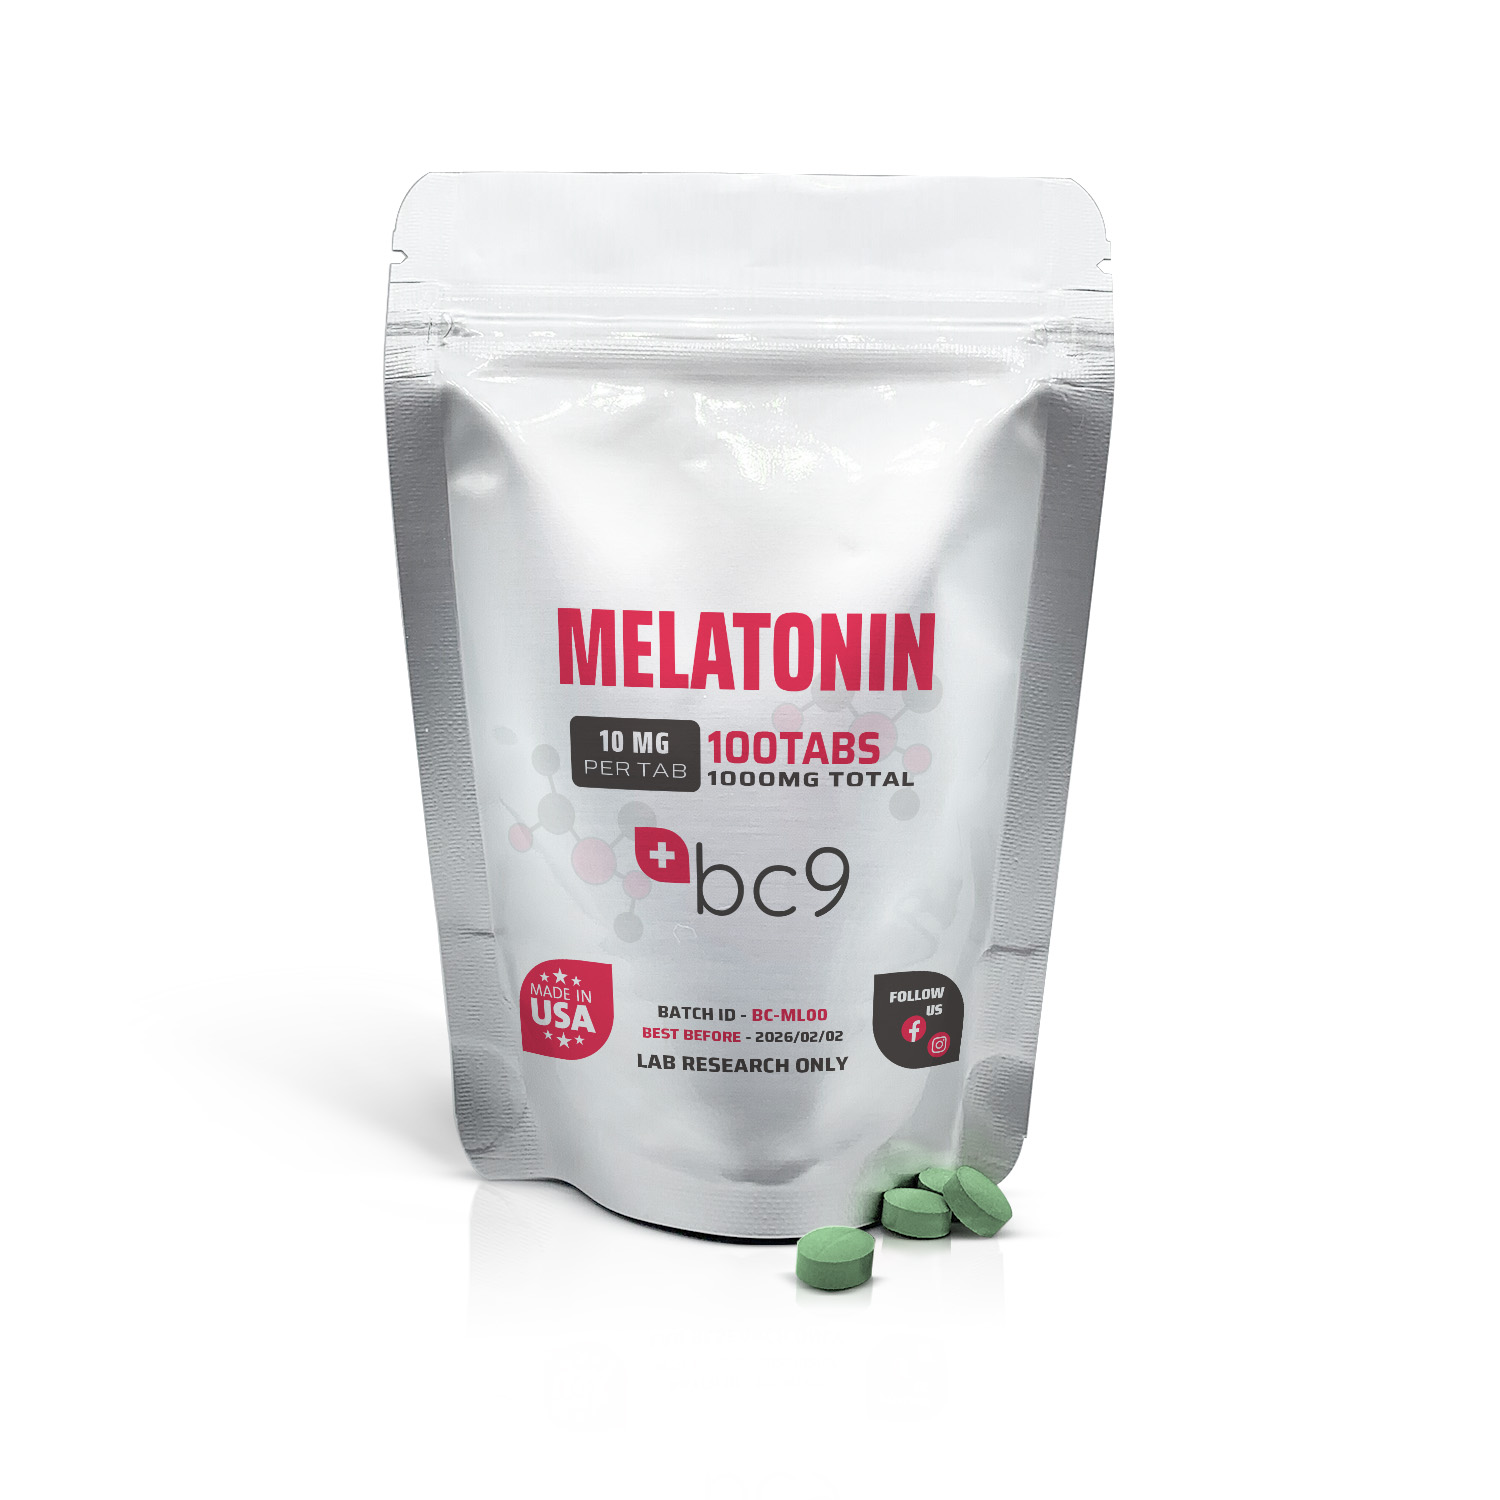 Melatonin Tablets For Sale | Fast Shipping | BC9.org